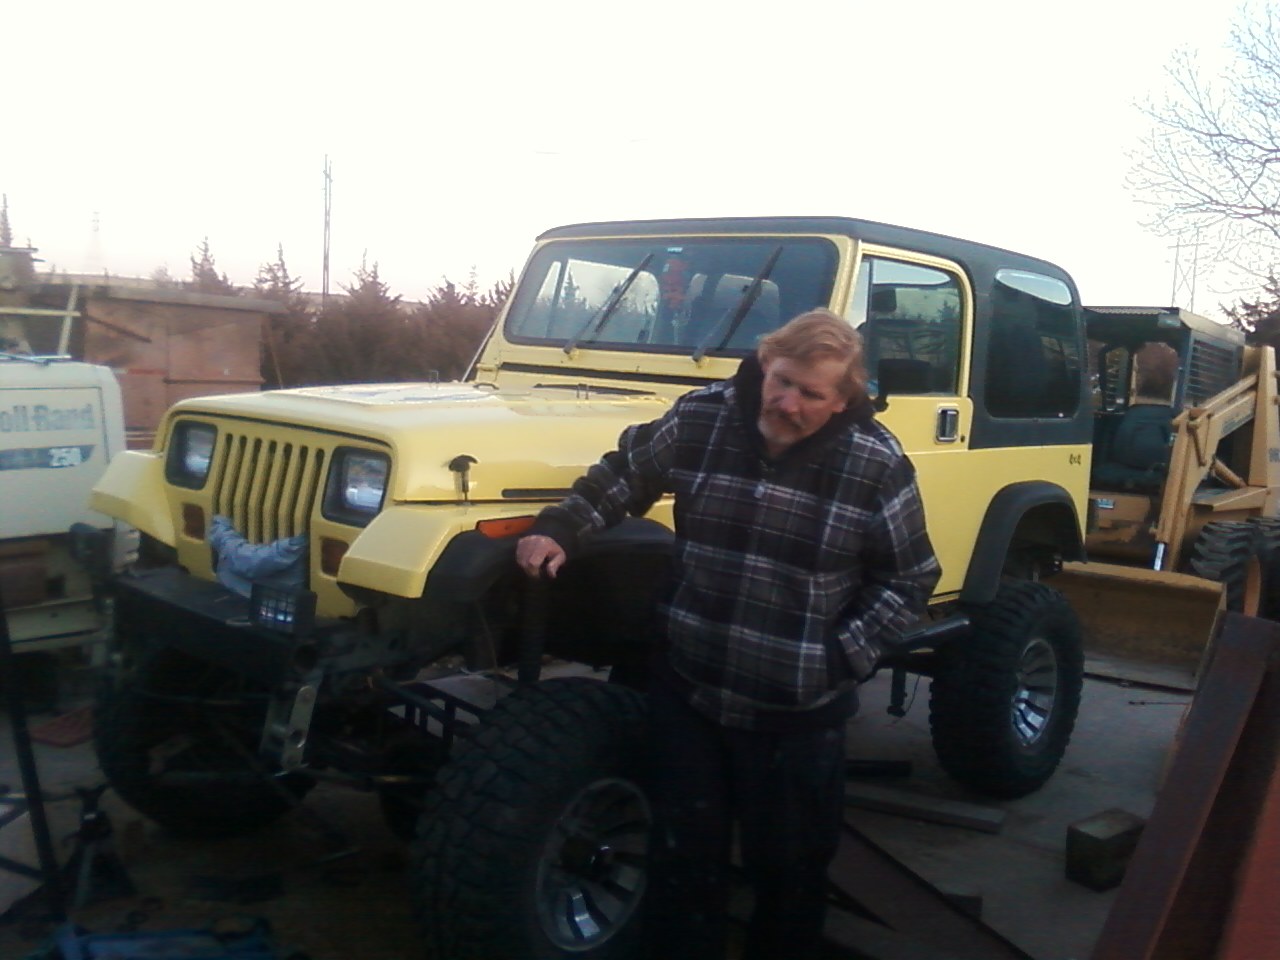 my pops standing next to my jeep he